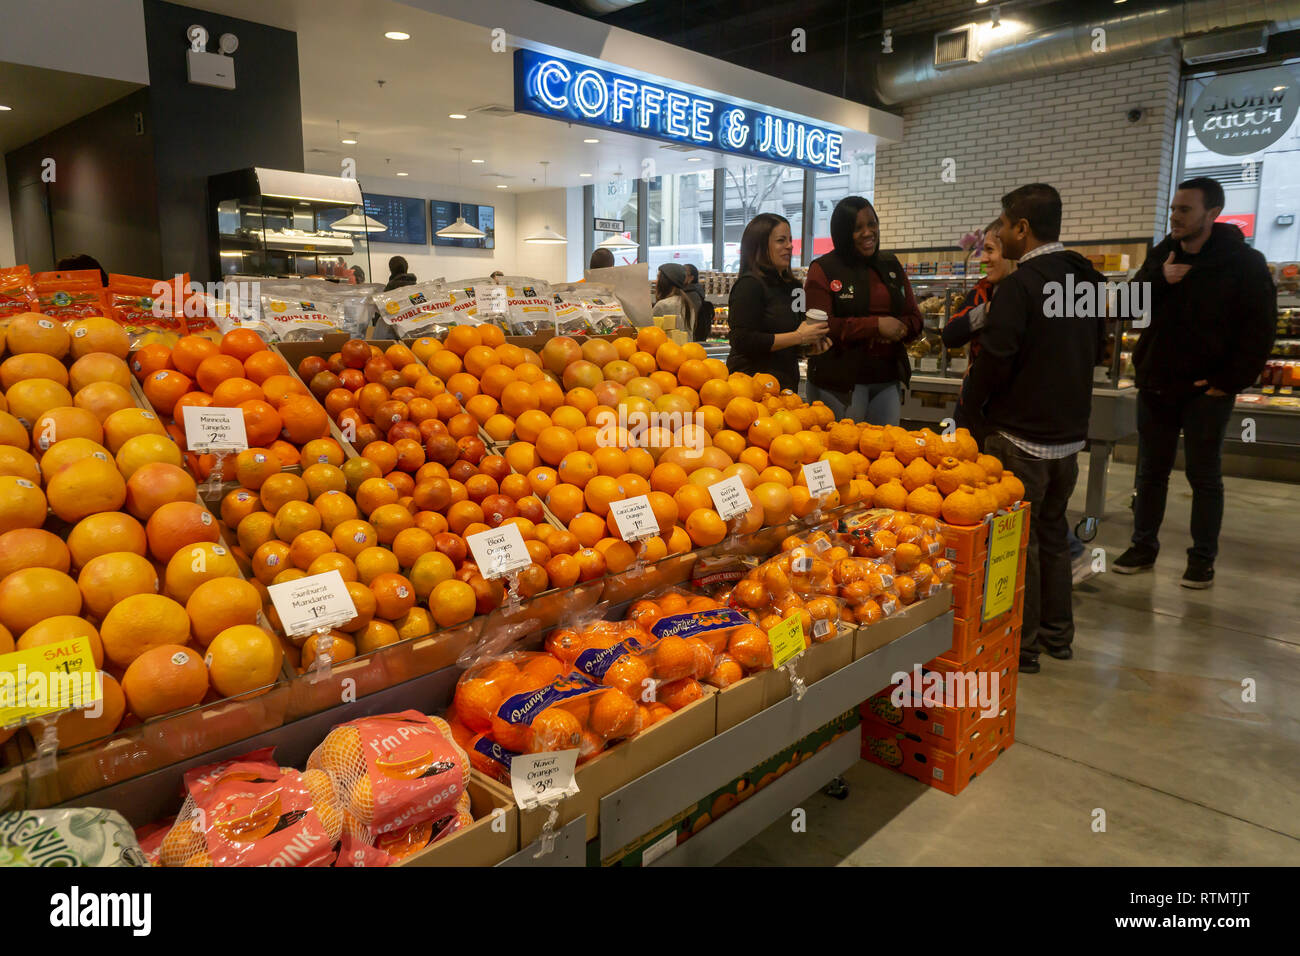 https://c8.alamy.com/comp/RTMTJT/a-miniature-whole-foods-market-in-the-chelsea-neighborhood-of-new-york-on-opening-day-friday-march-2019-located-in-the-former-space-occupied-by-whole-foods-beauty-and-health-products-the-miniature-location-sells-snacks-and-prepared-foods-as-well-as-hosting-a-coffee-and-kombucha-bar-amazon-the-owner-of-whole-foods-market-announced-it-will-be-opening-a-chain-of-supermarkets-with-a-price-point-lower-than-wfm-and-with-a-smaller-footprint-although-not-as-small-as-this-store-richard-b-levine-RTMTJT.jpg